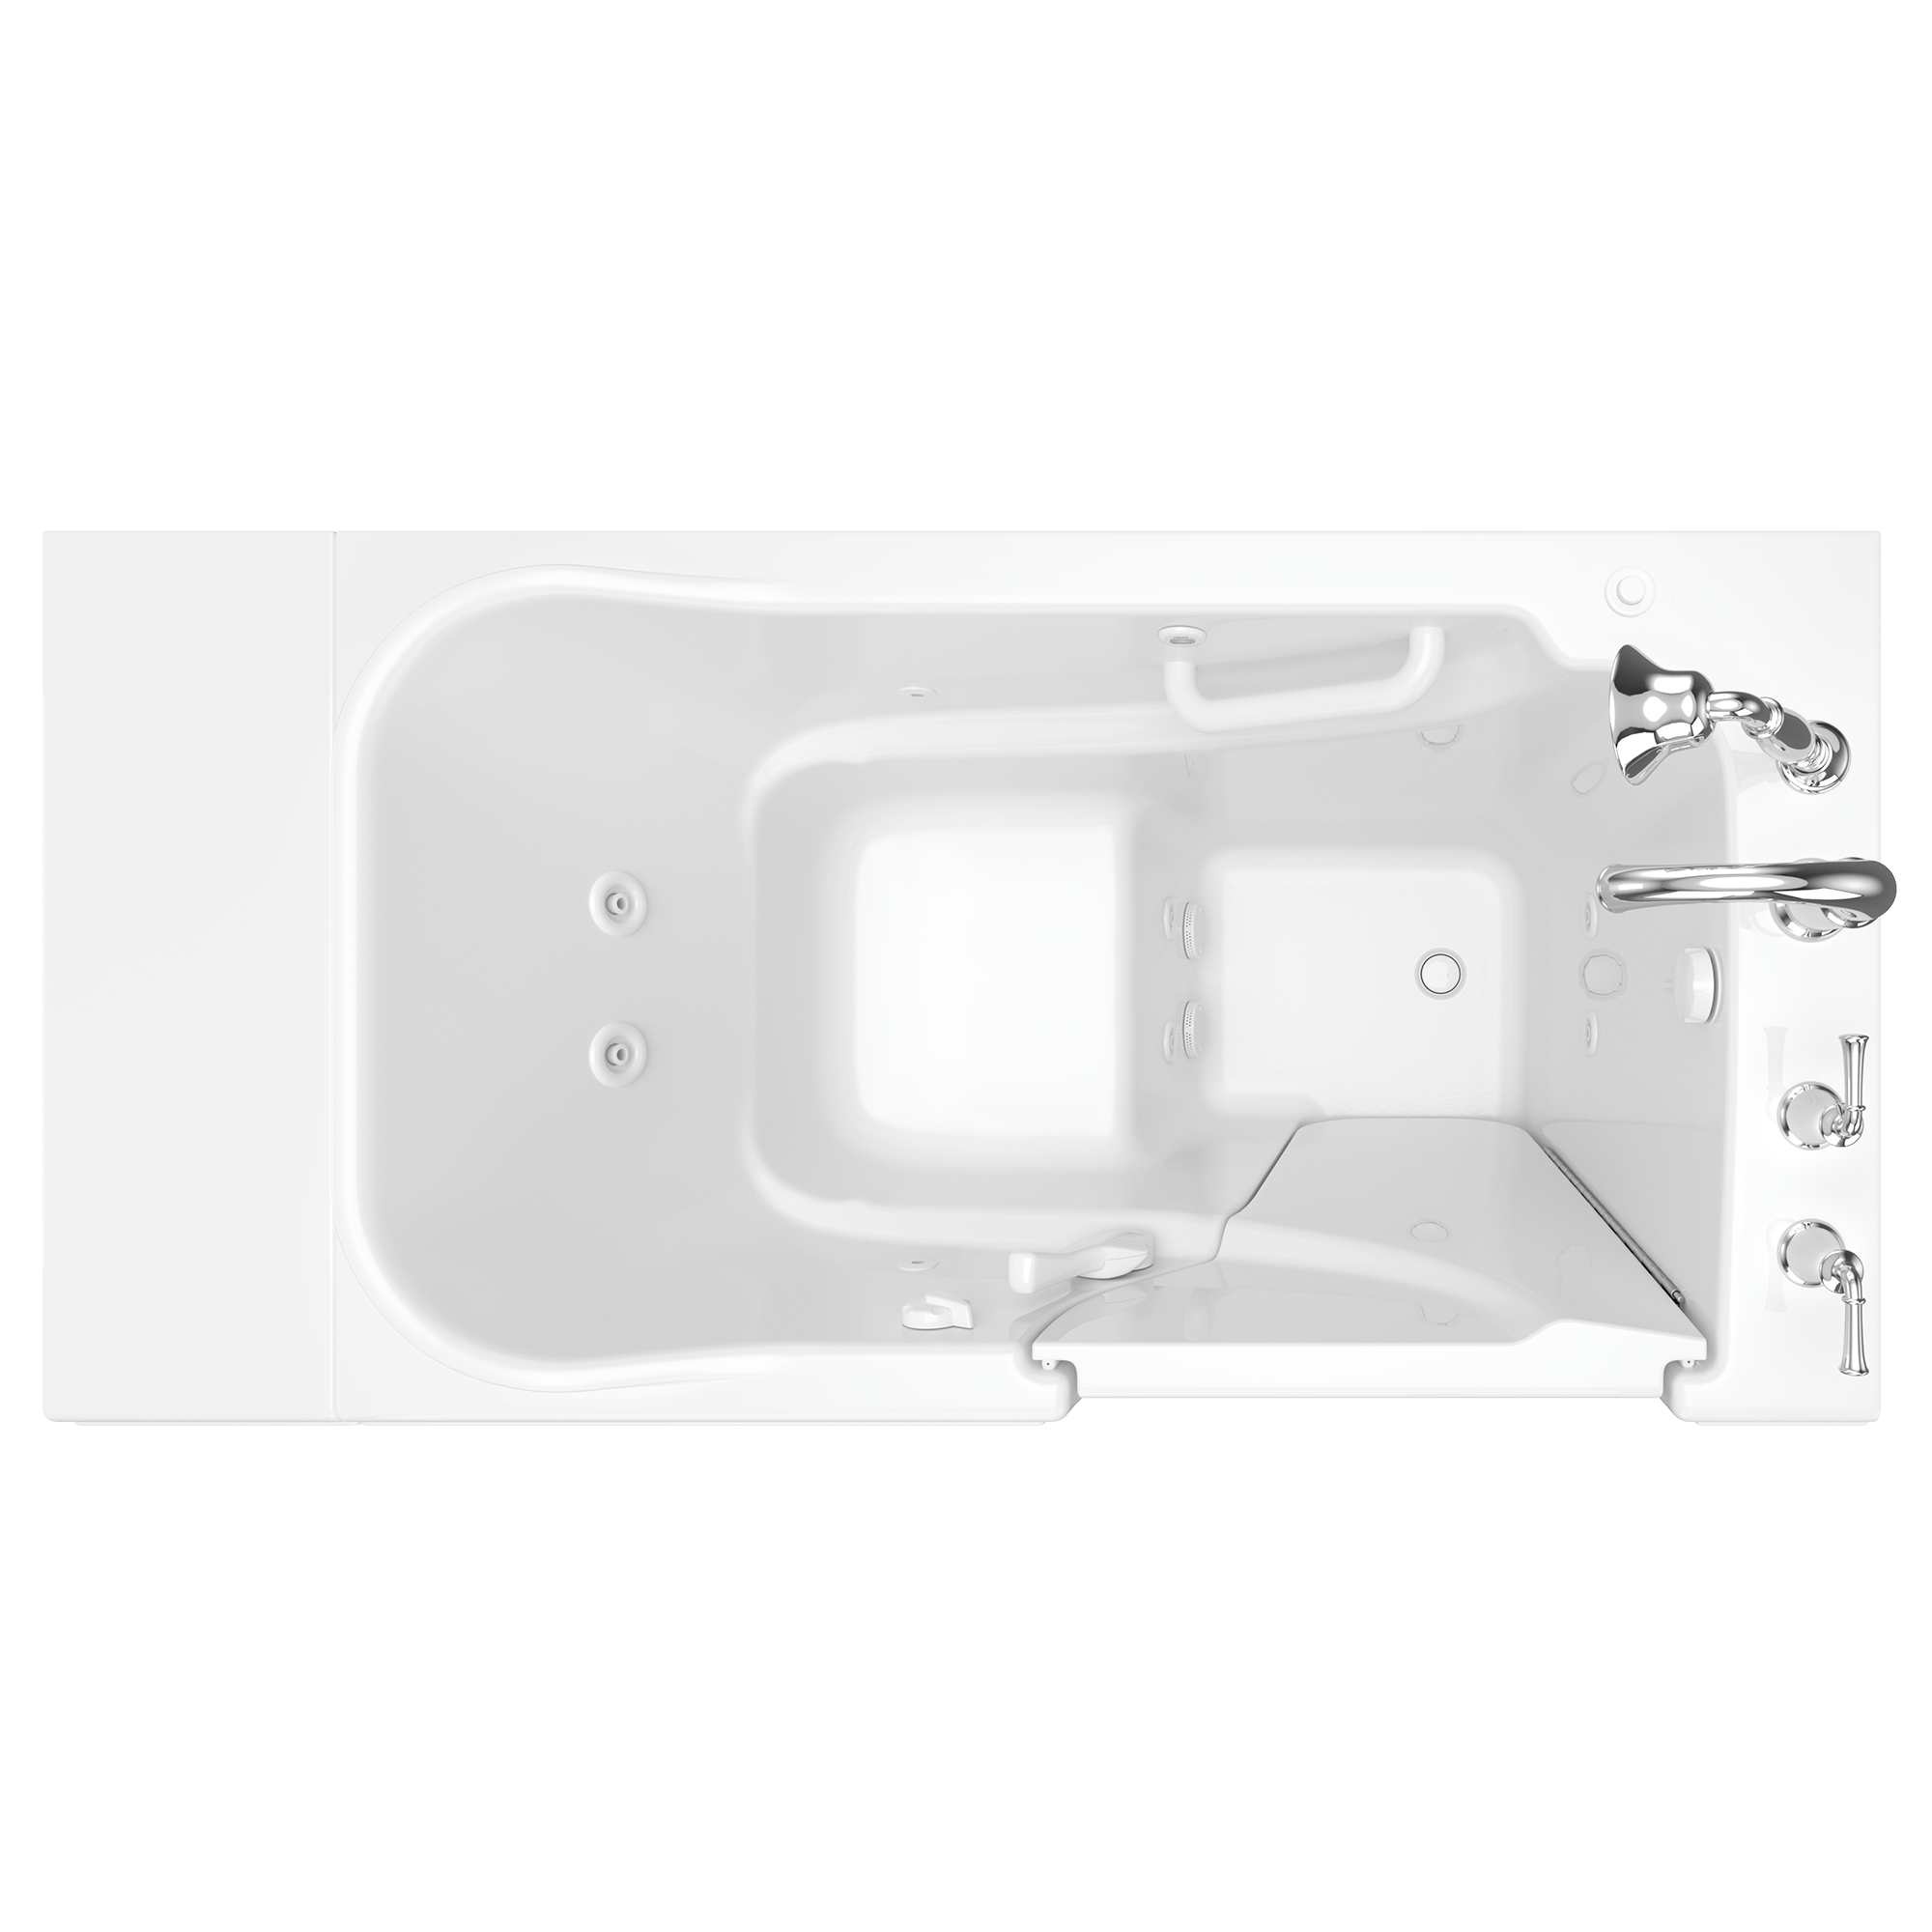 Gelcoat Value Series 30 x 52  Inch Walk in Tub With Whirlpool System   Right Hand Drain With Faucet WIB WHITE